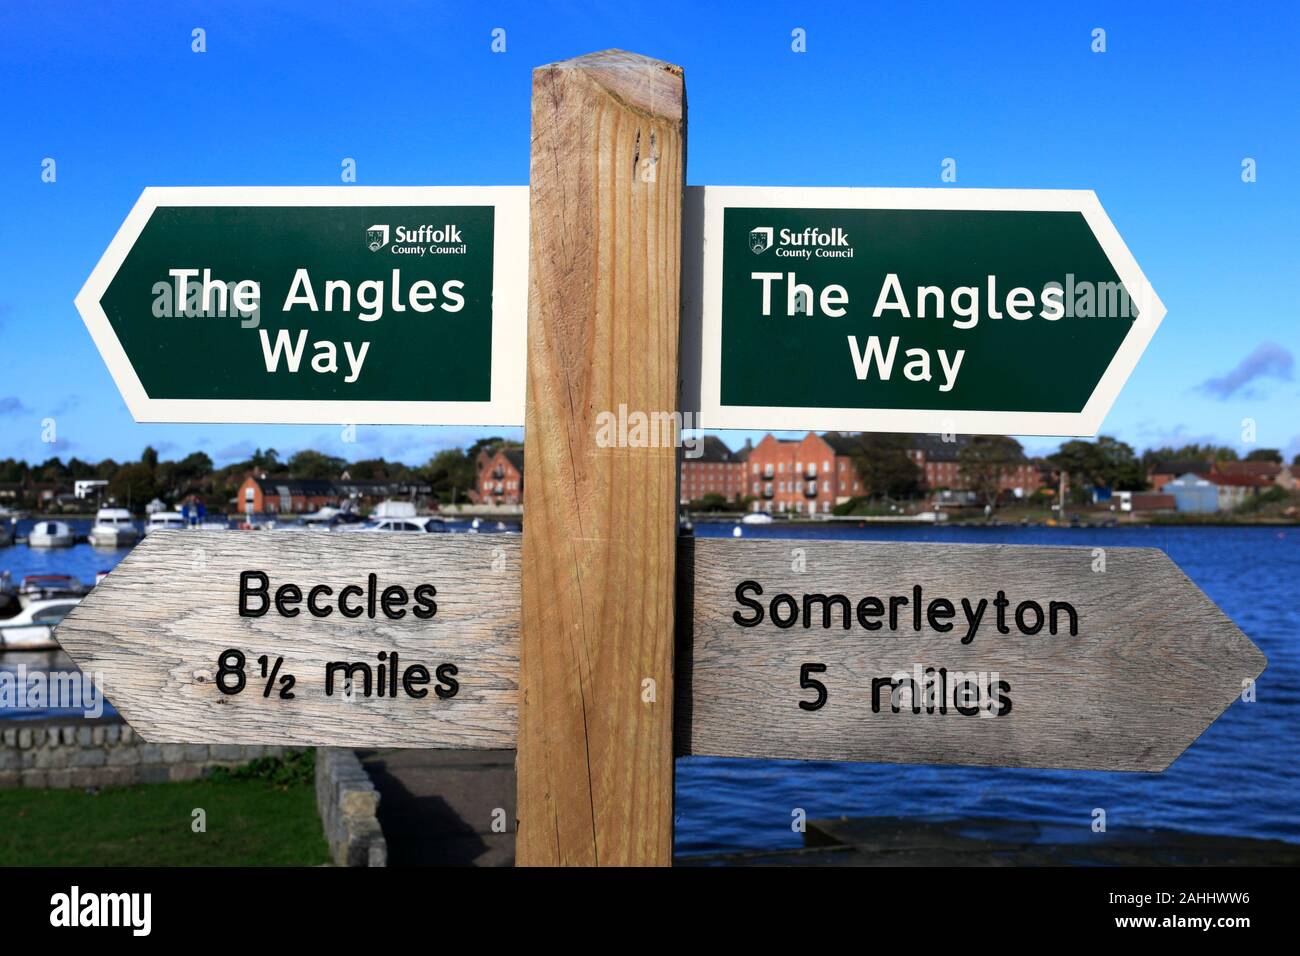 The Angles Way footpath sign, Oulton Broad, Lowestoft town, Suffolk county, England Stock Photo